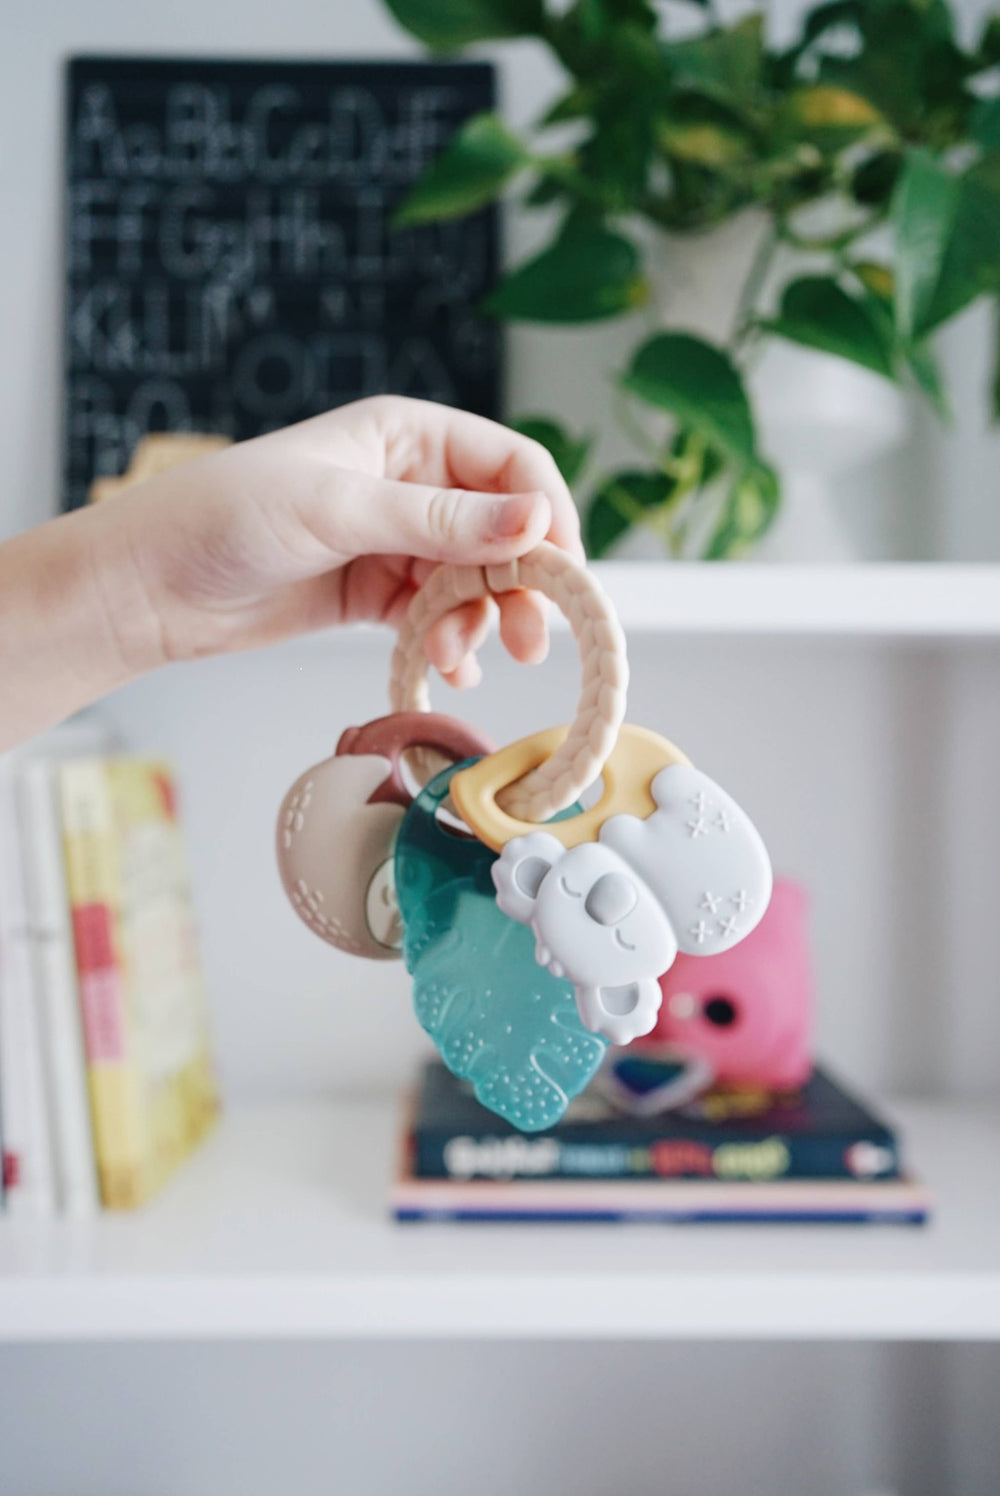 Tropical Itzy Keys Texture Ring with Teether + Rattle - Pine & Moss